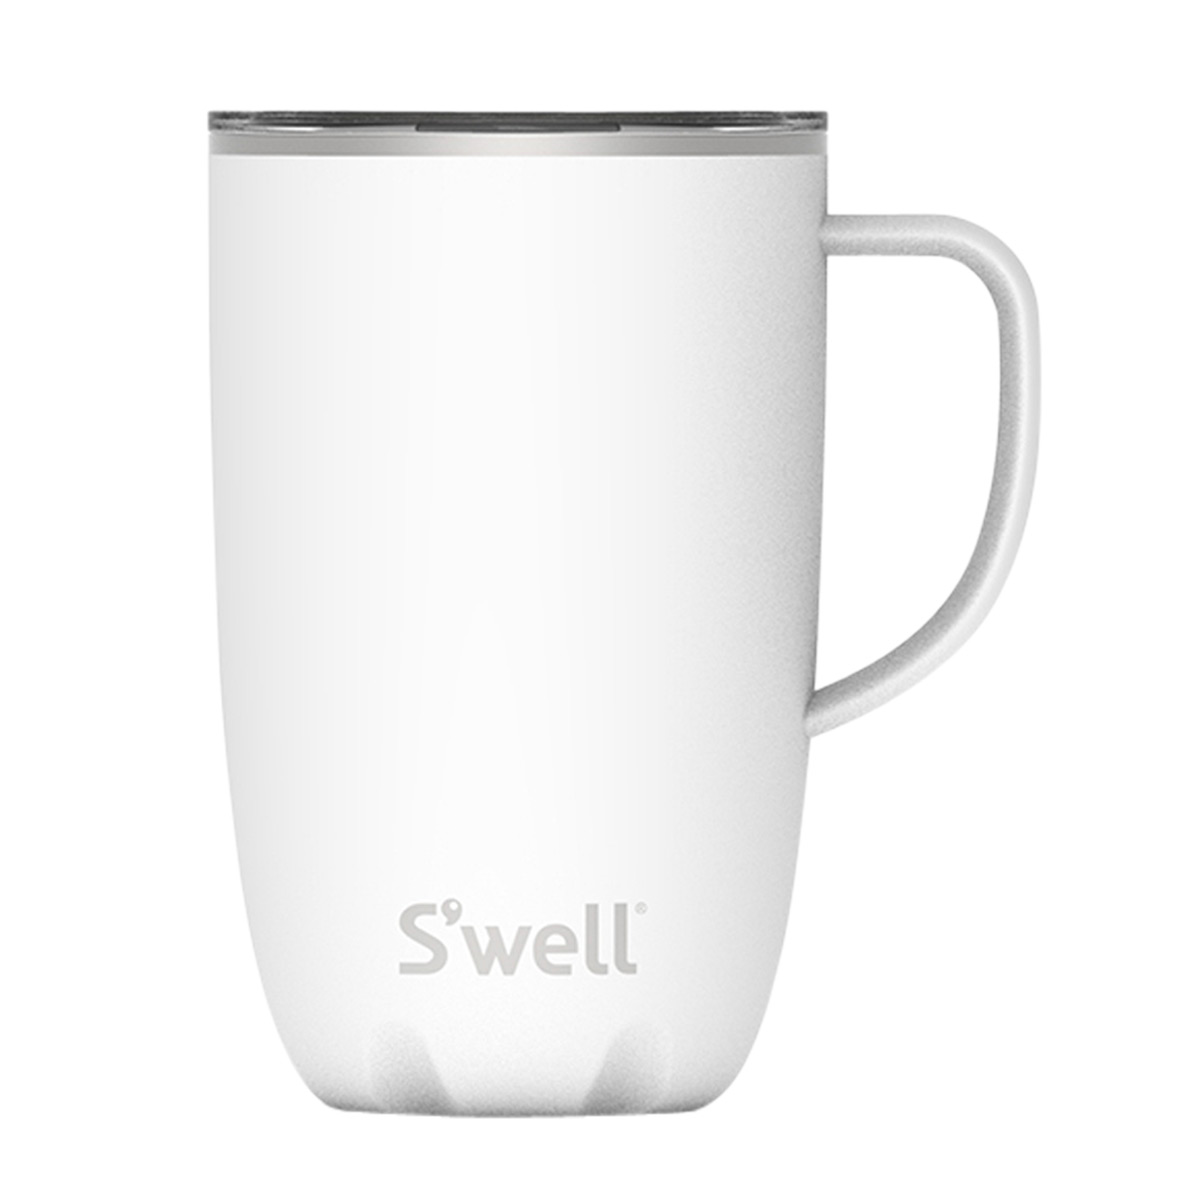 https://www.containerstore.com/catalogimages/440649/10088841-Swell-16-oz-Mug-with-Handle.jpg